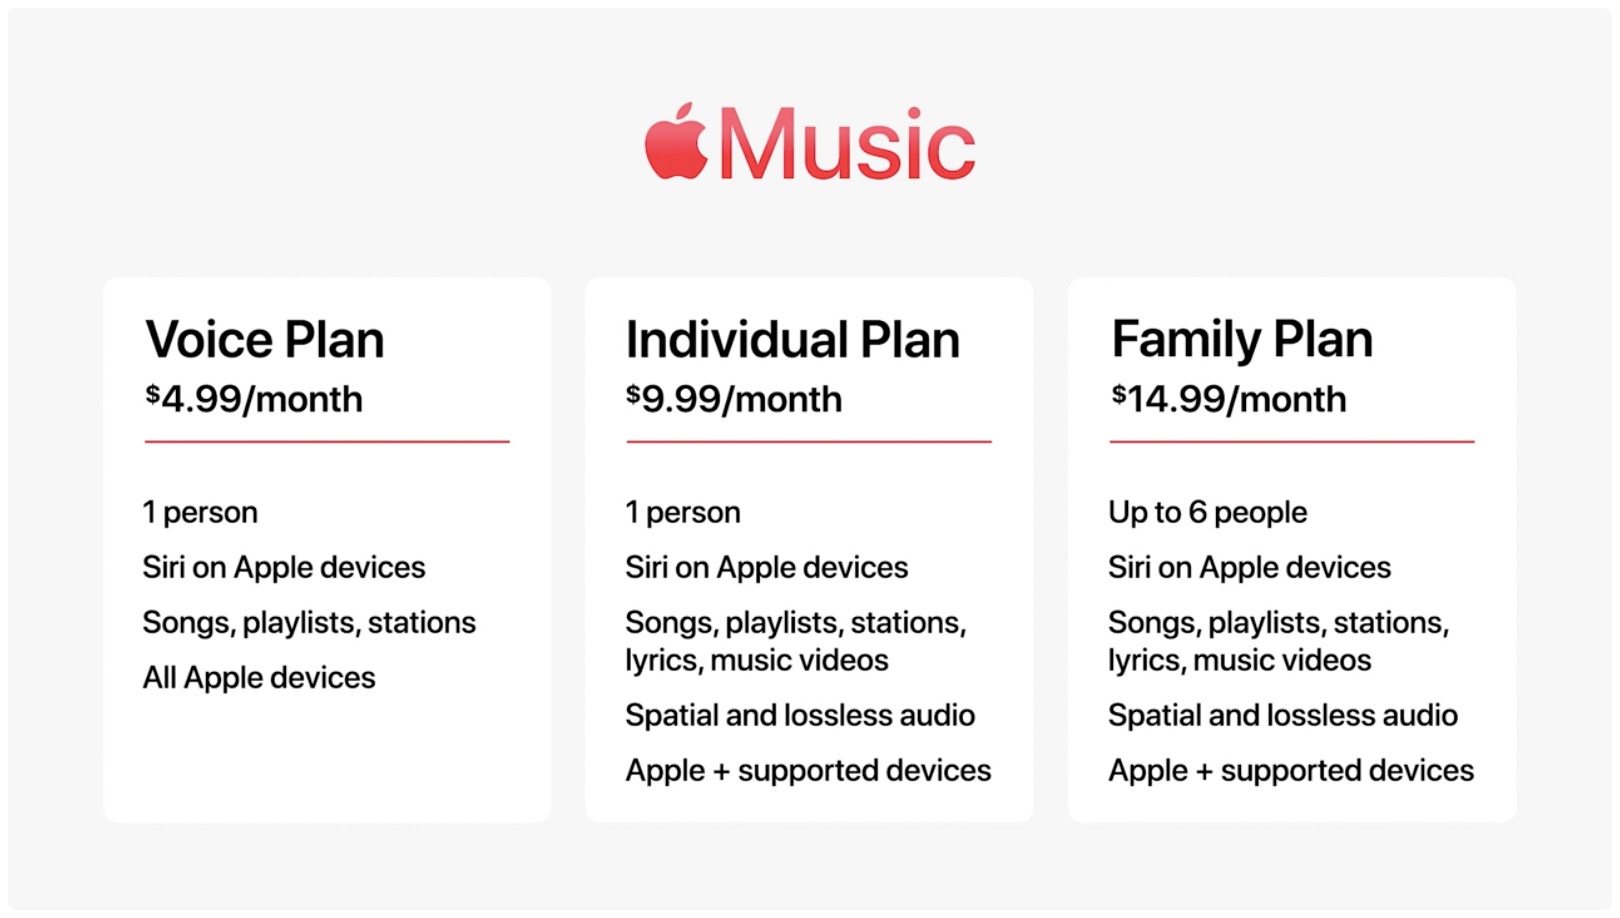 Apple's marketing image showing the Apple Music subscription plans: Voice, Individual and Family